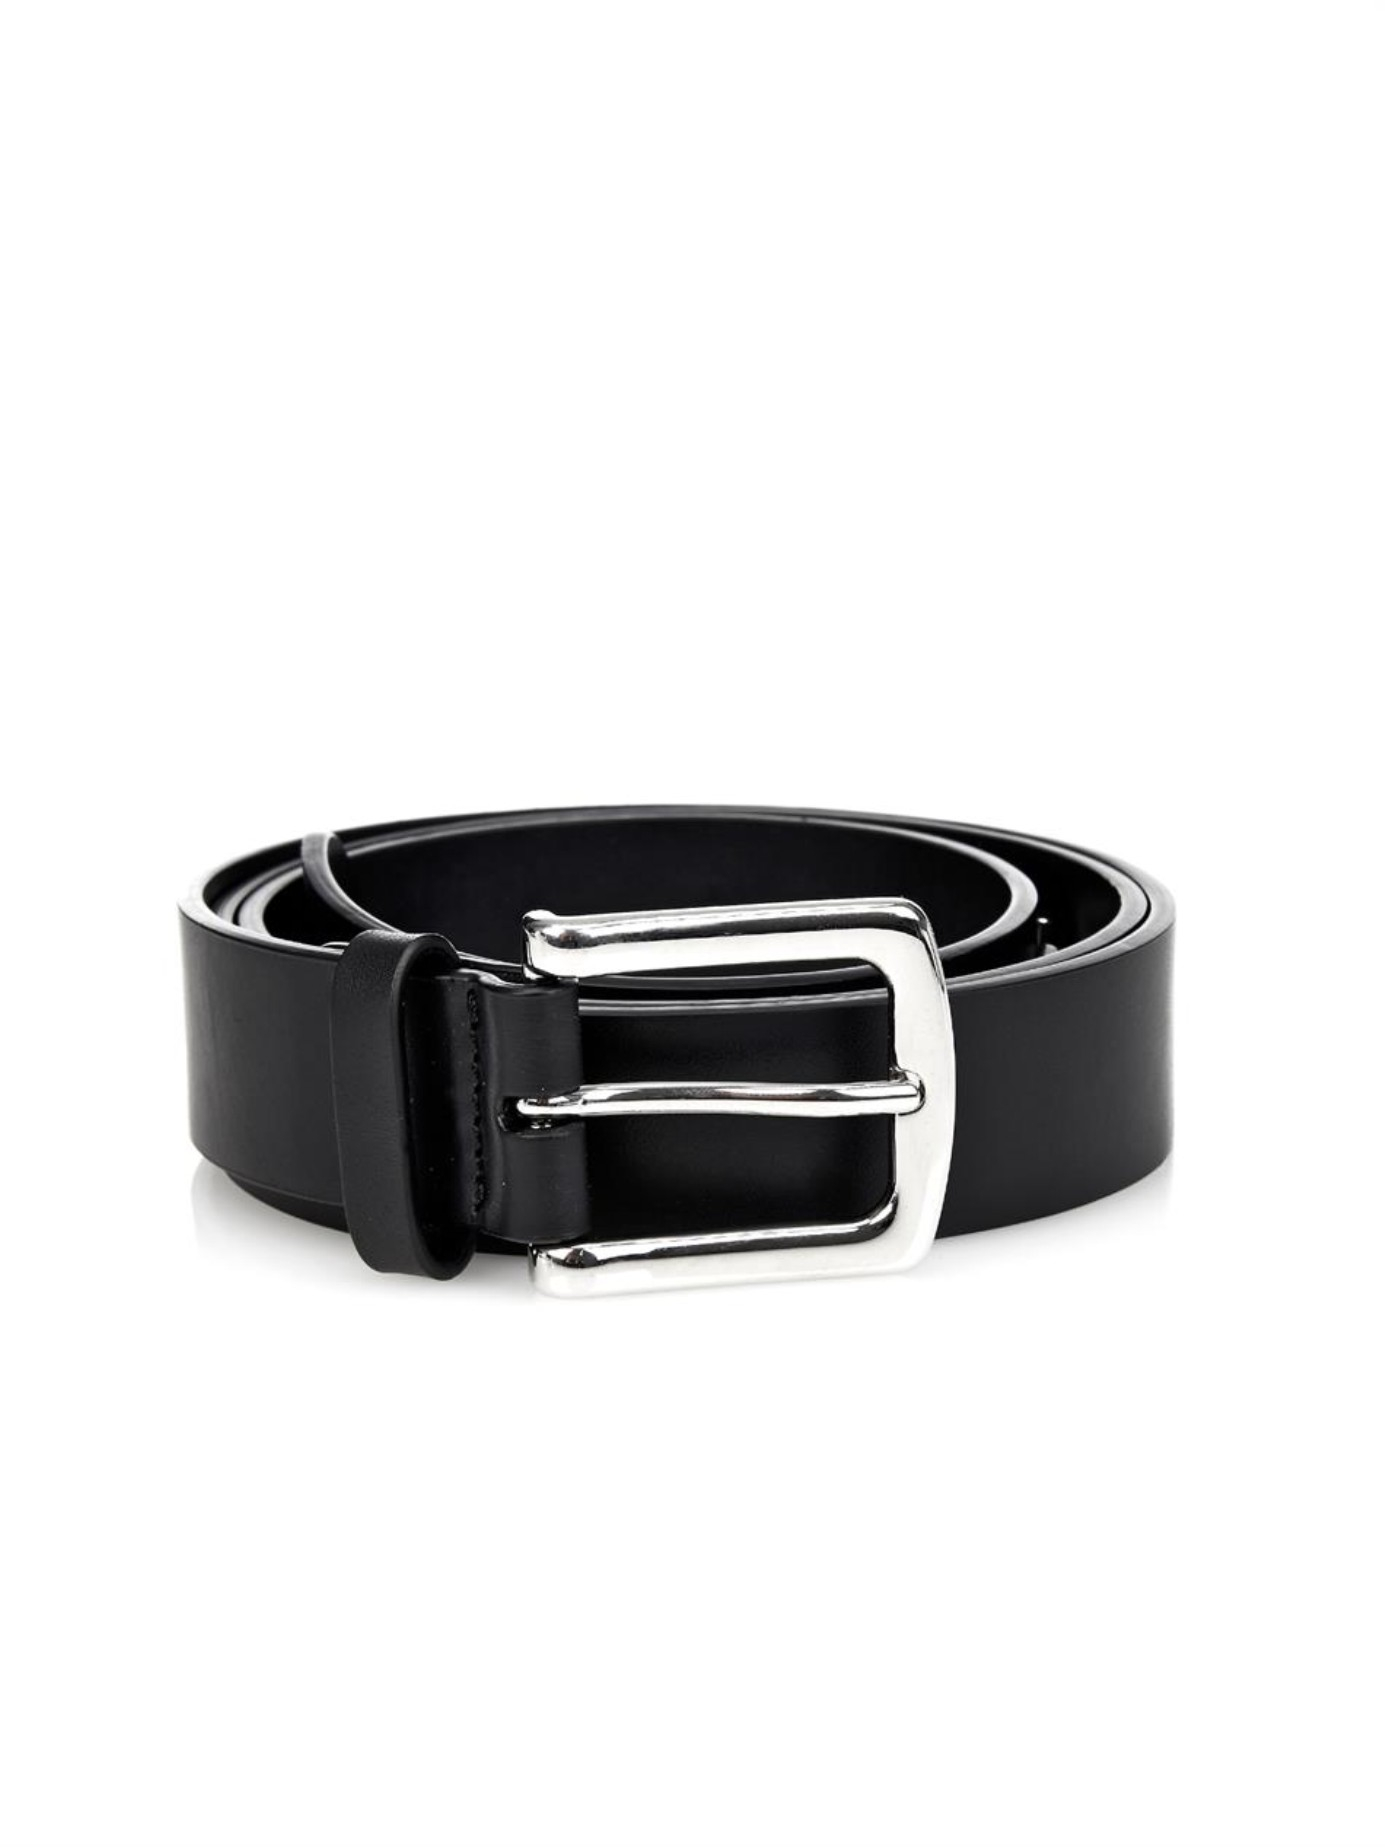 Givenchy Star-Studded Leather Belt in Black for Men - Lyst